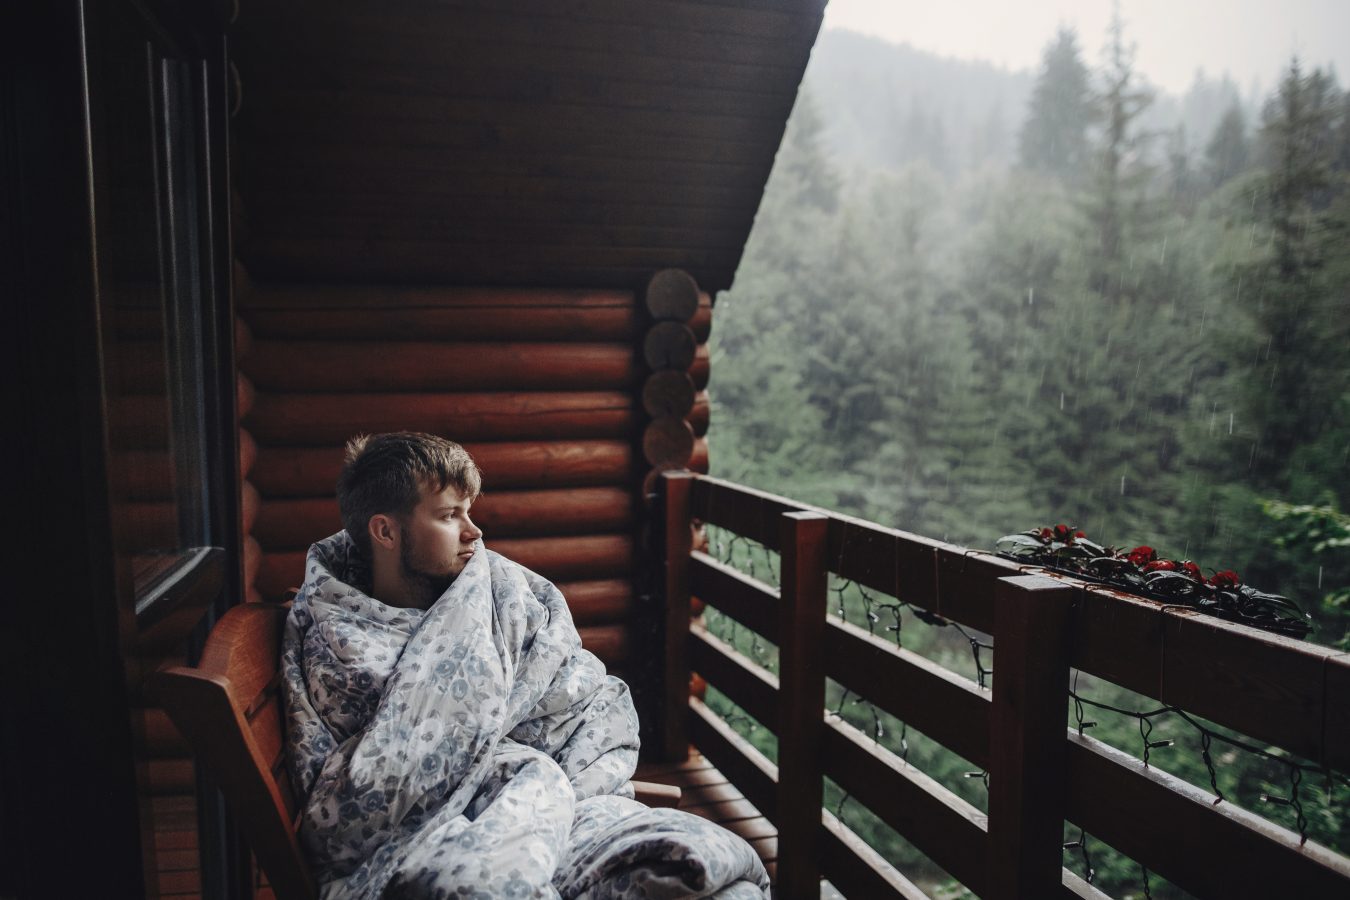 Man in blanket sitting on cabin porch in the rainy woods.